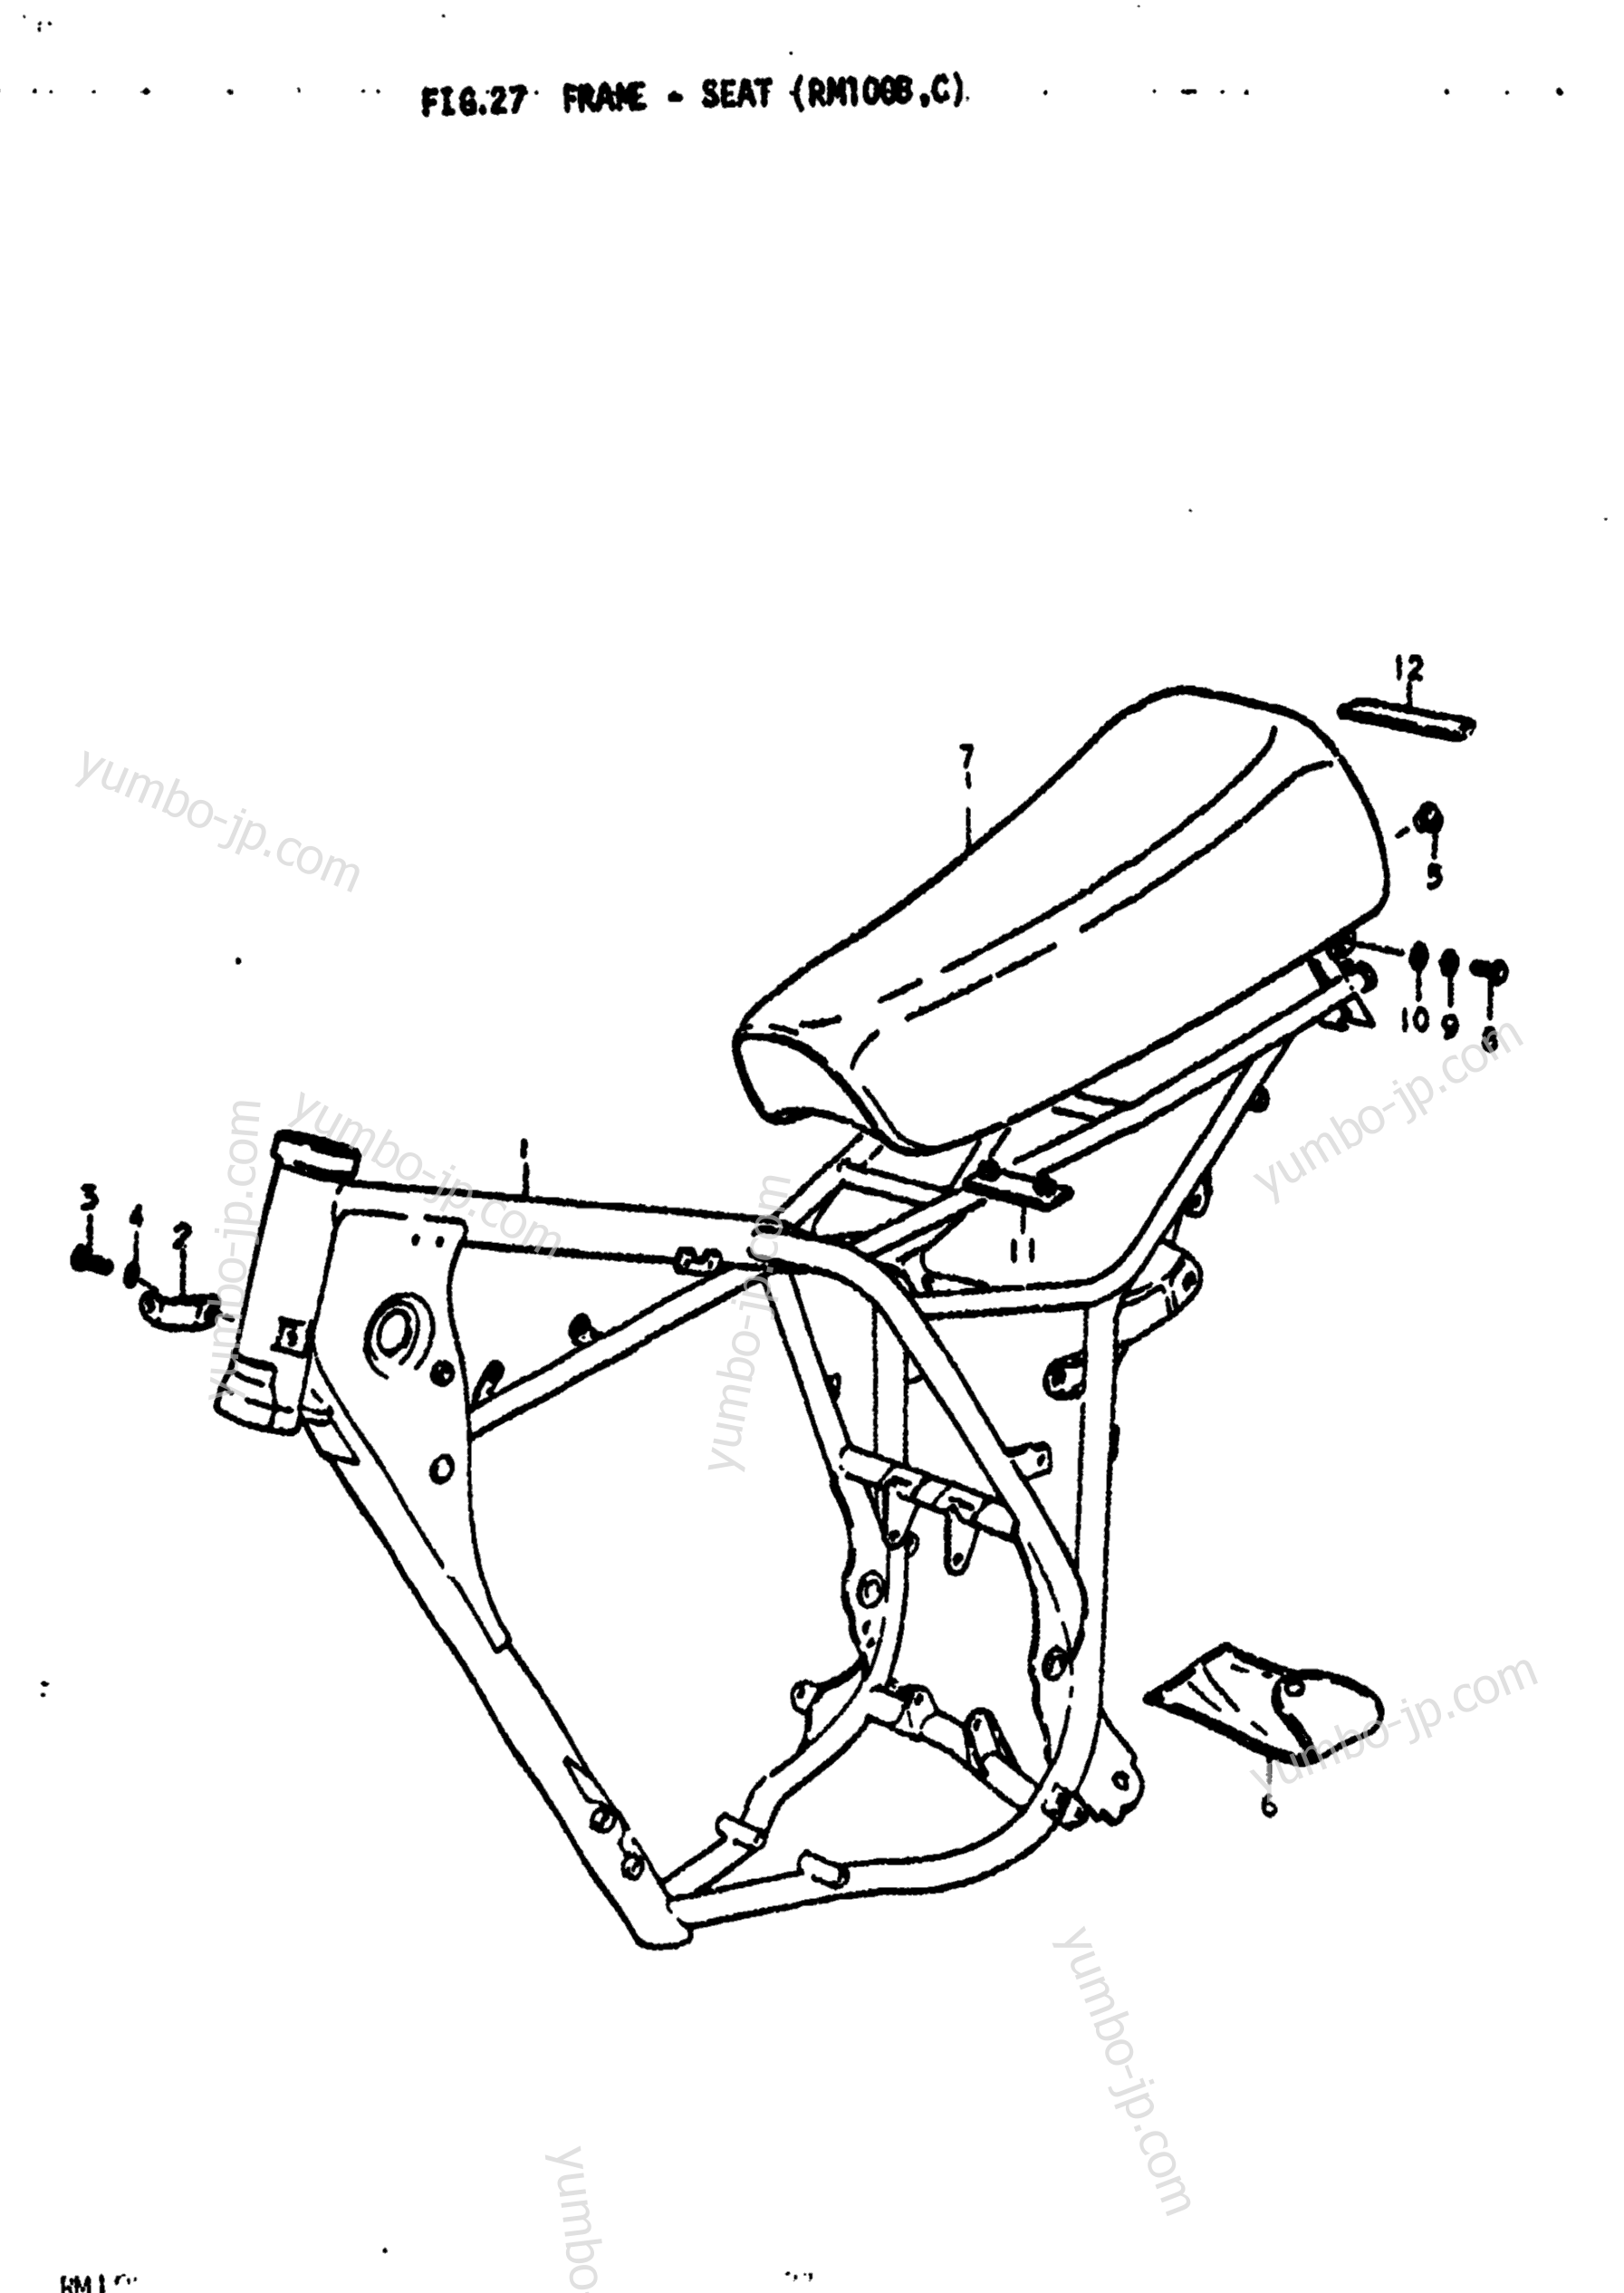 FRAME - SEAT (RM100B for motorcycles SUZUKI RM100 1978 year